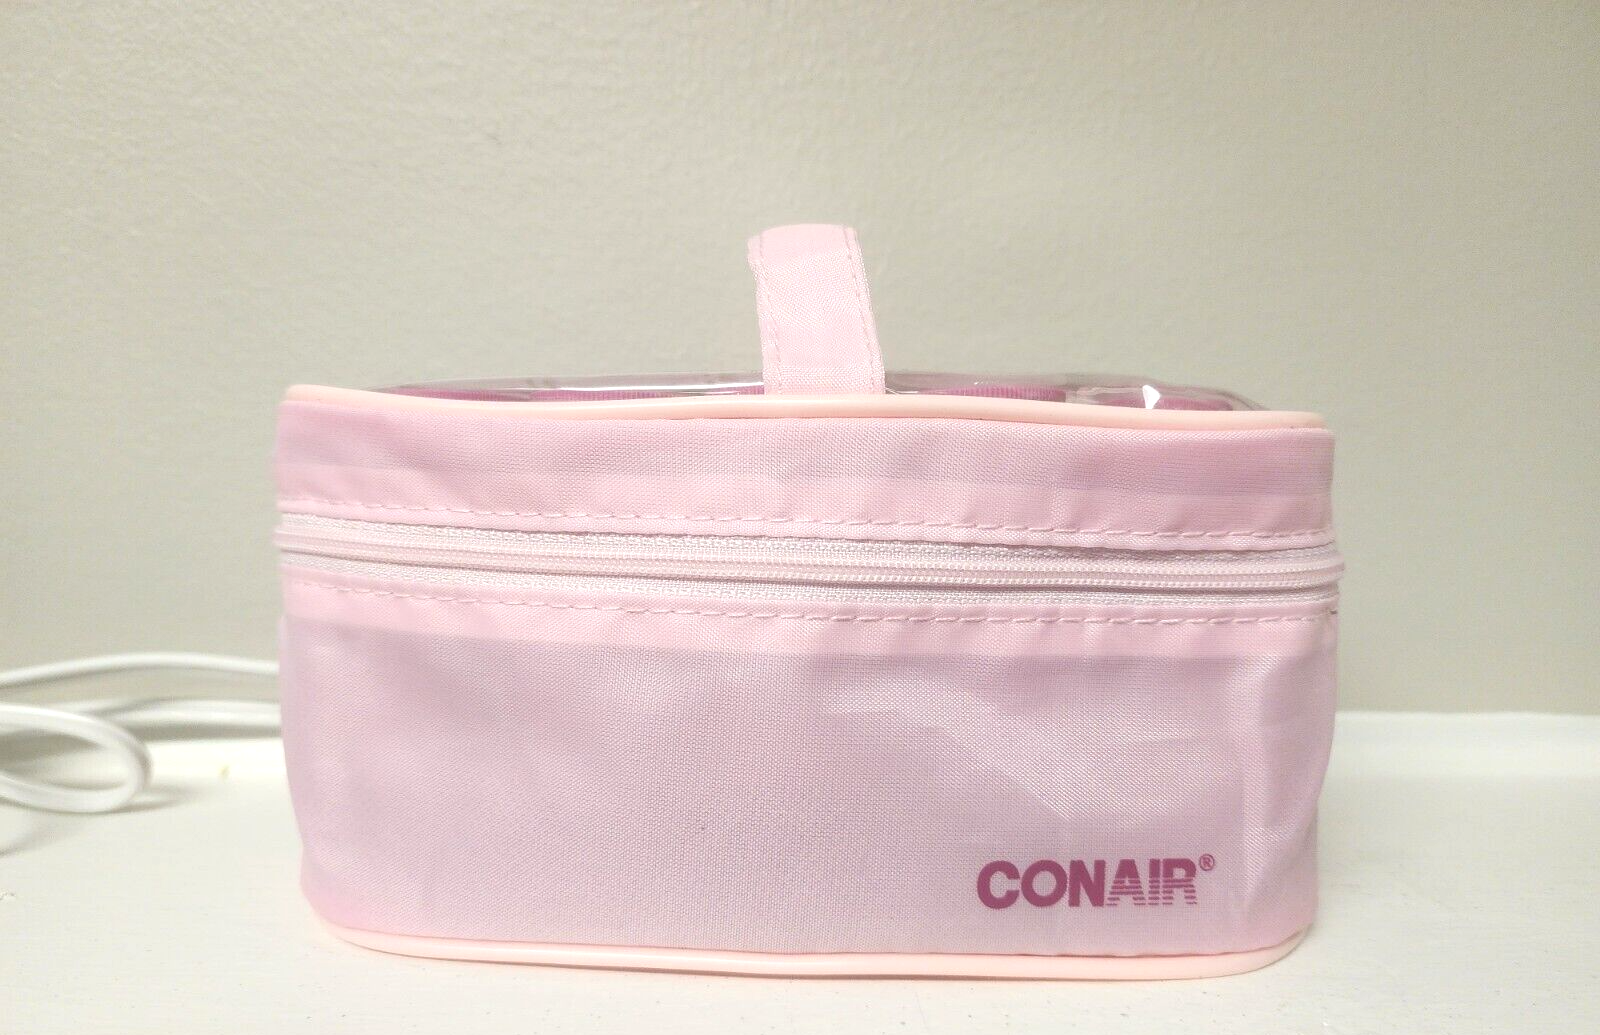 Conair Instant Heat Compact Hot Roller Set of 10 with clips - Tested - works - $14.84